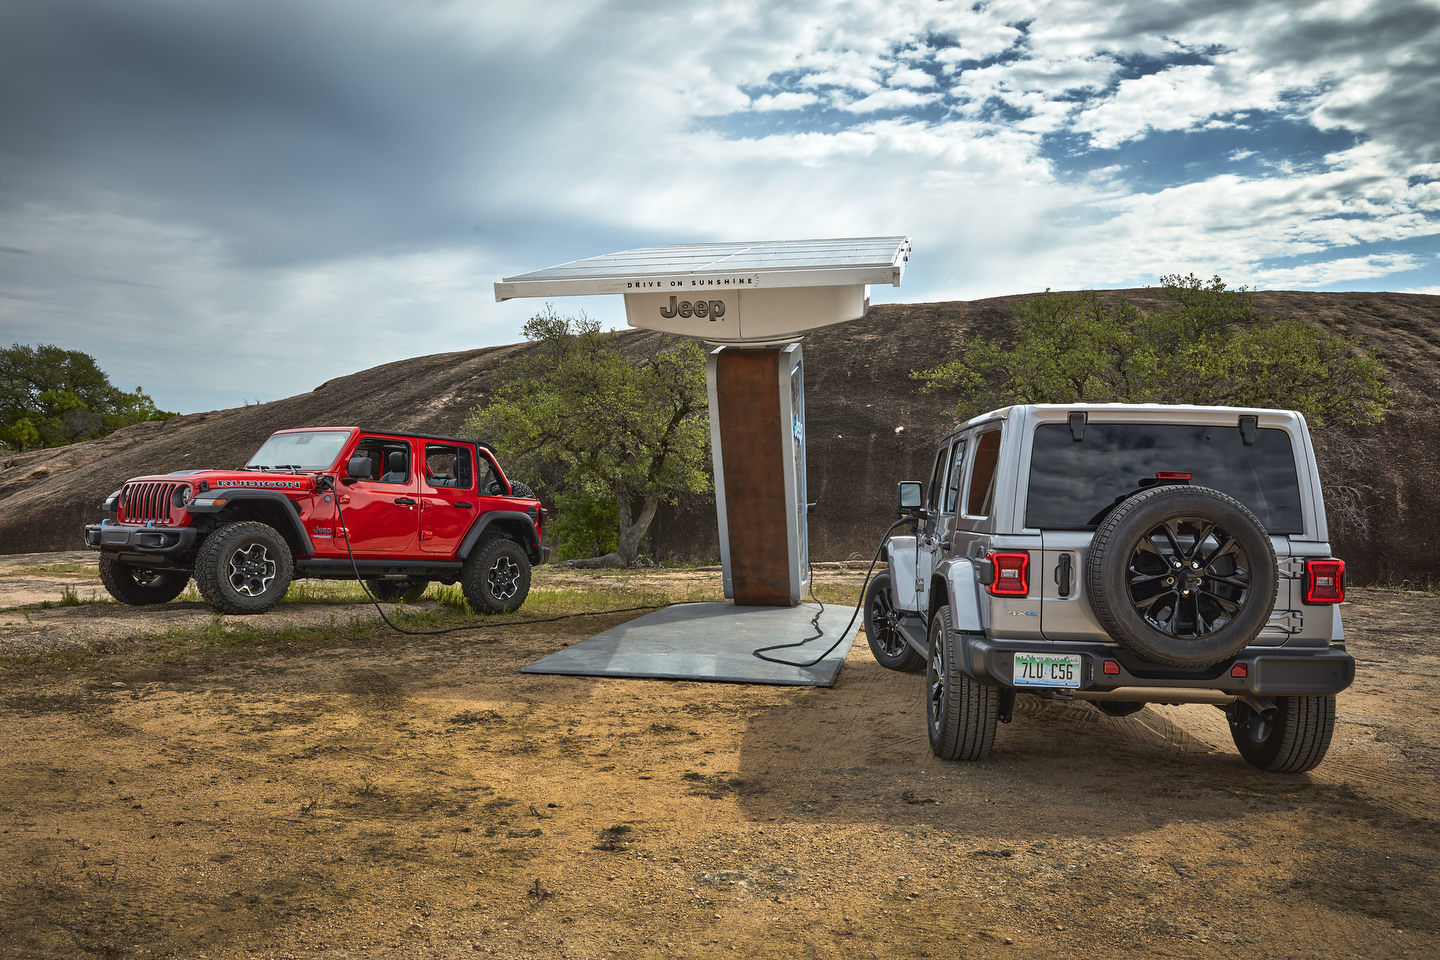 10 things to know about the hybrid technology of the Jeep Wrangler 4xe